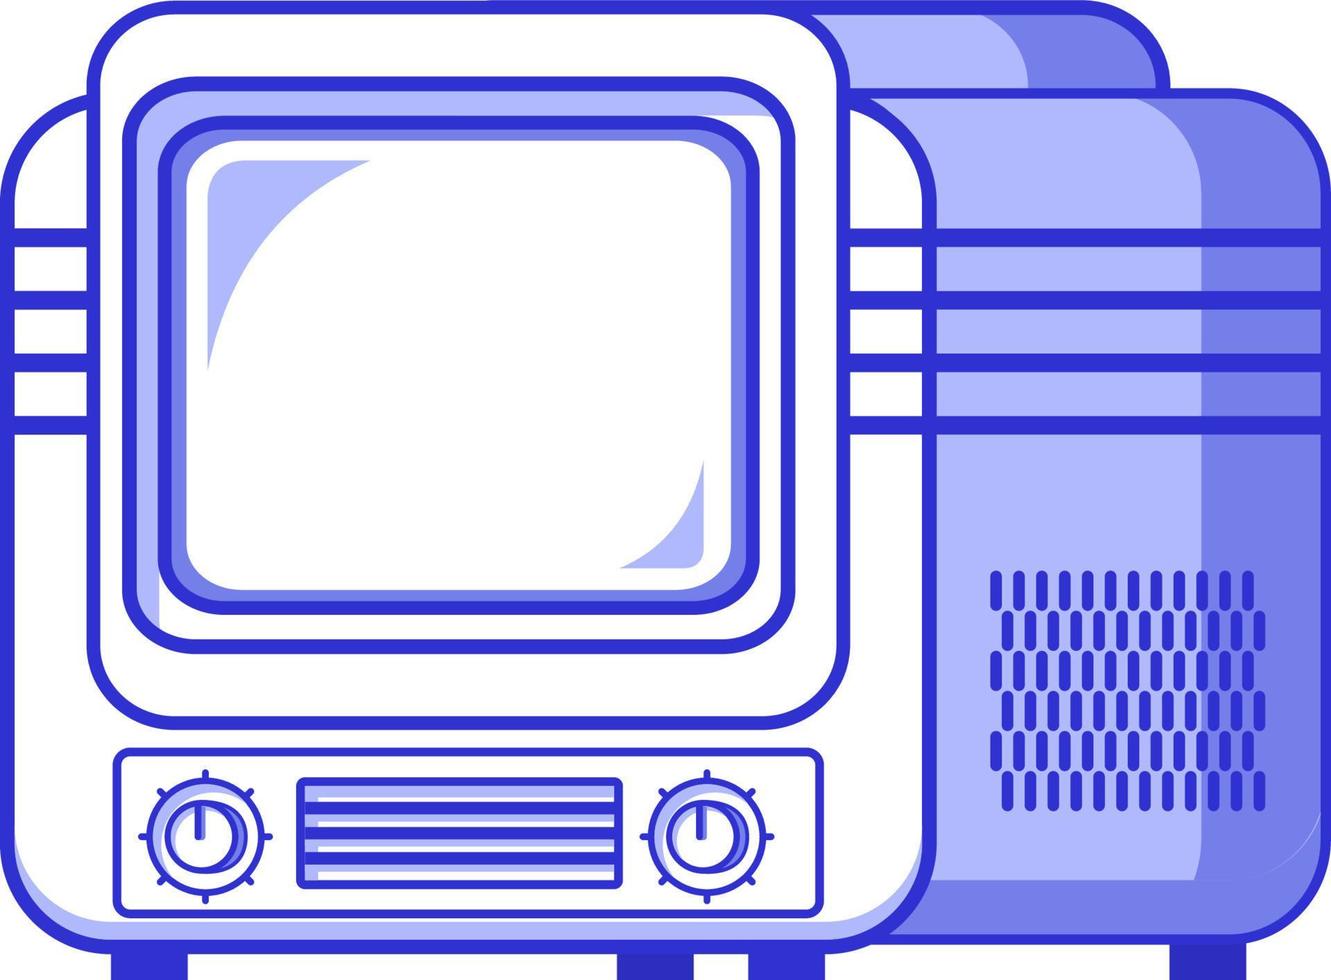 Old TV.Retro vintage television icon.Outline Flat vector isolated on a white background.Symbol for a mobile application or website.